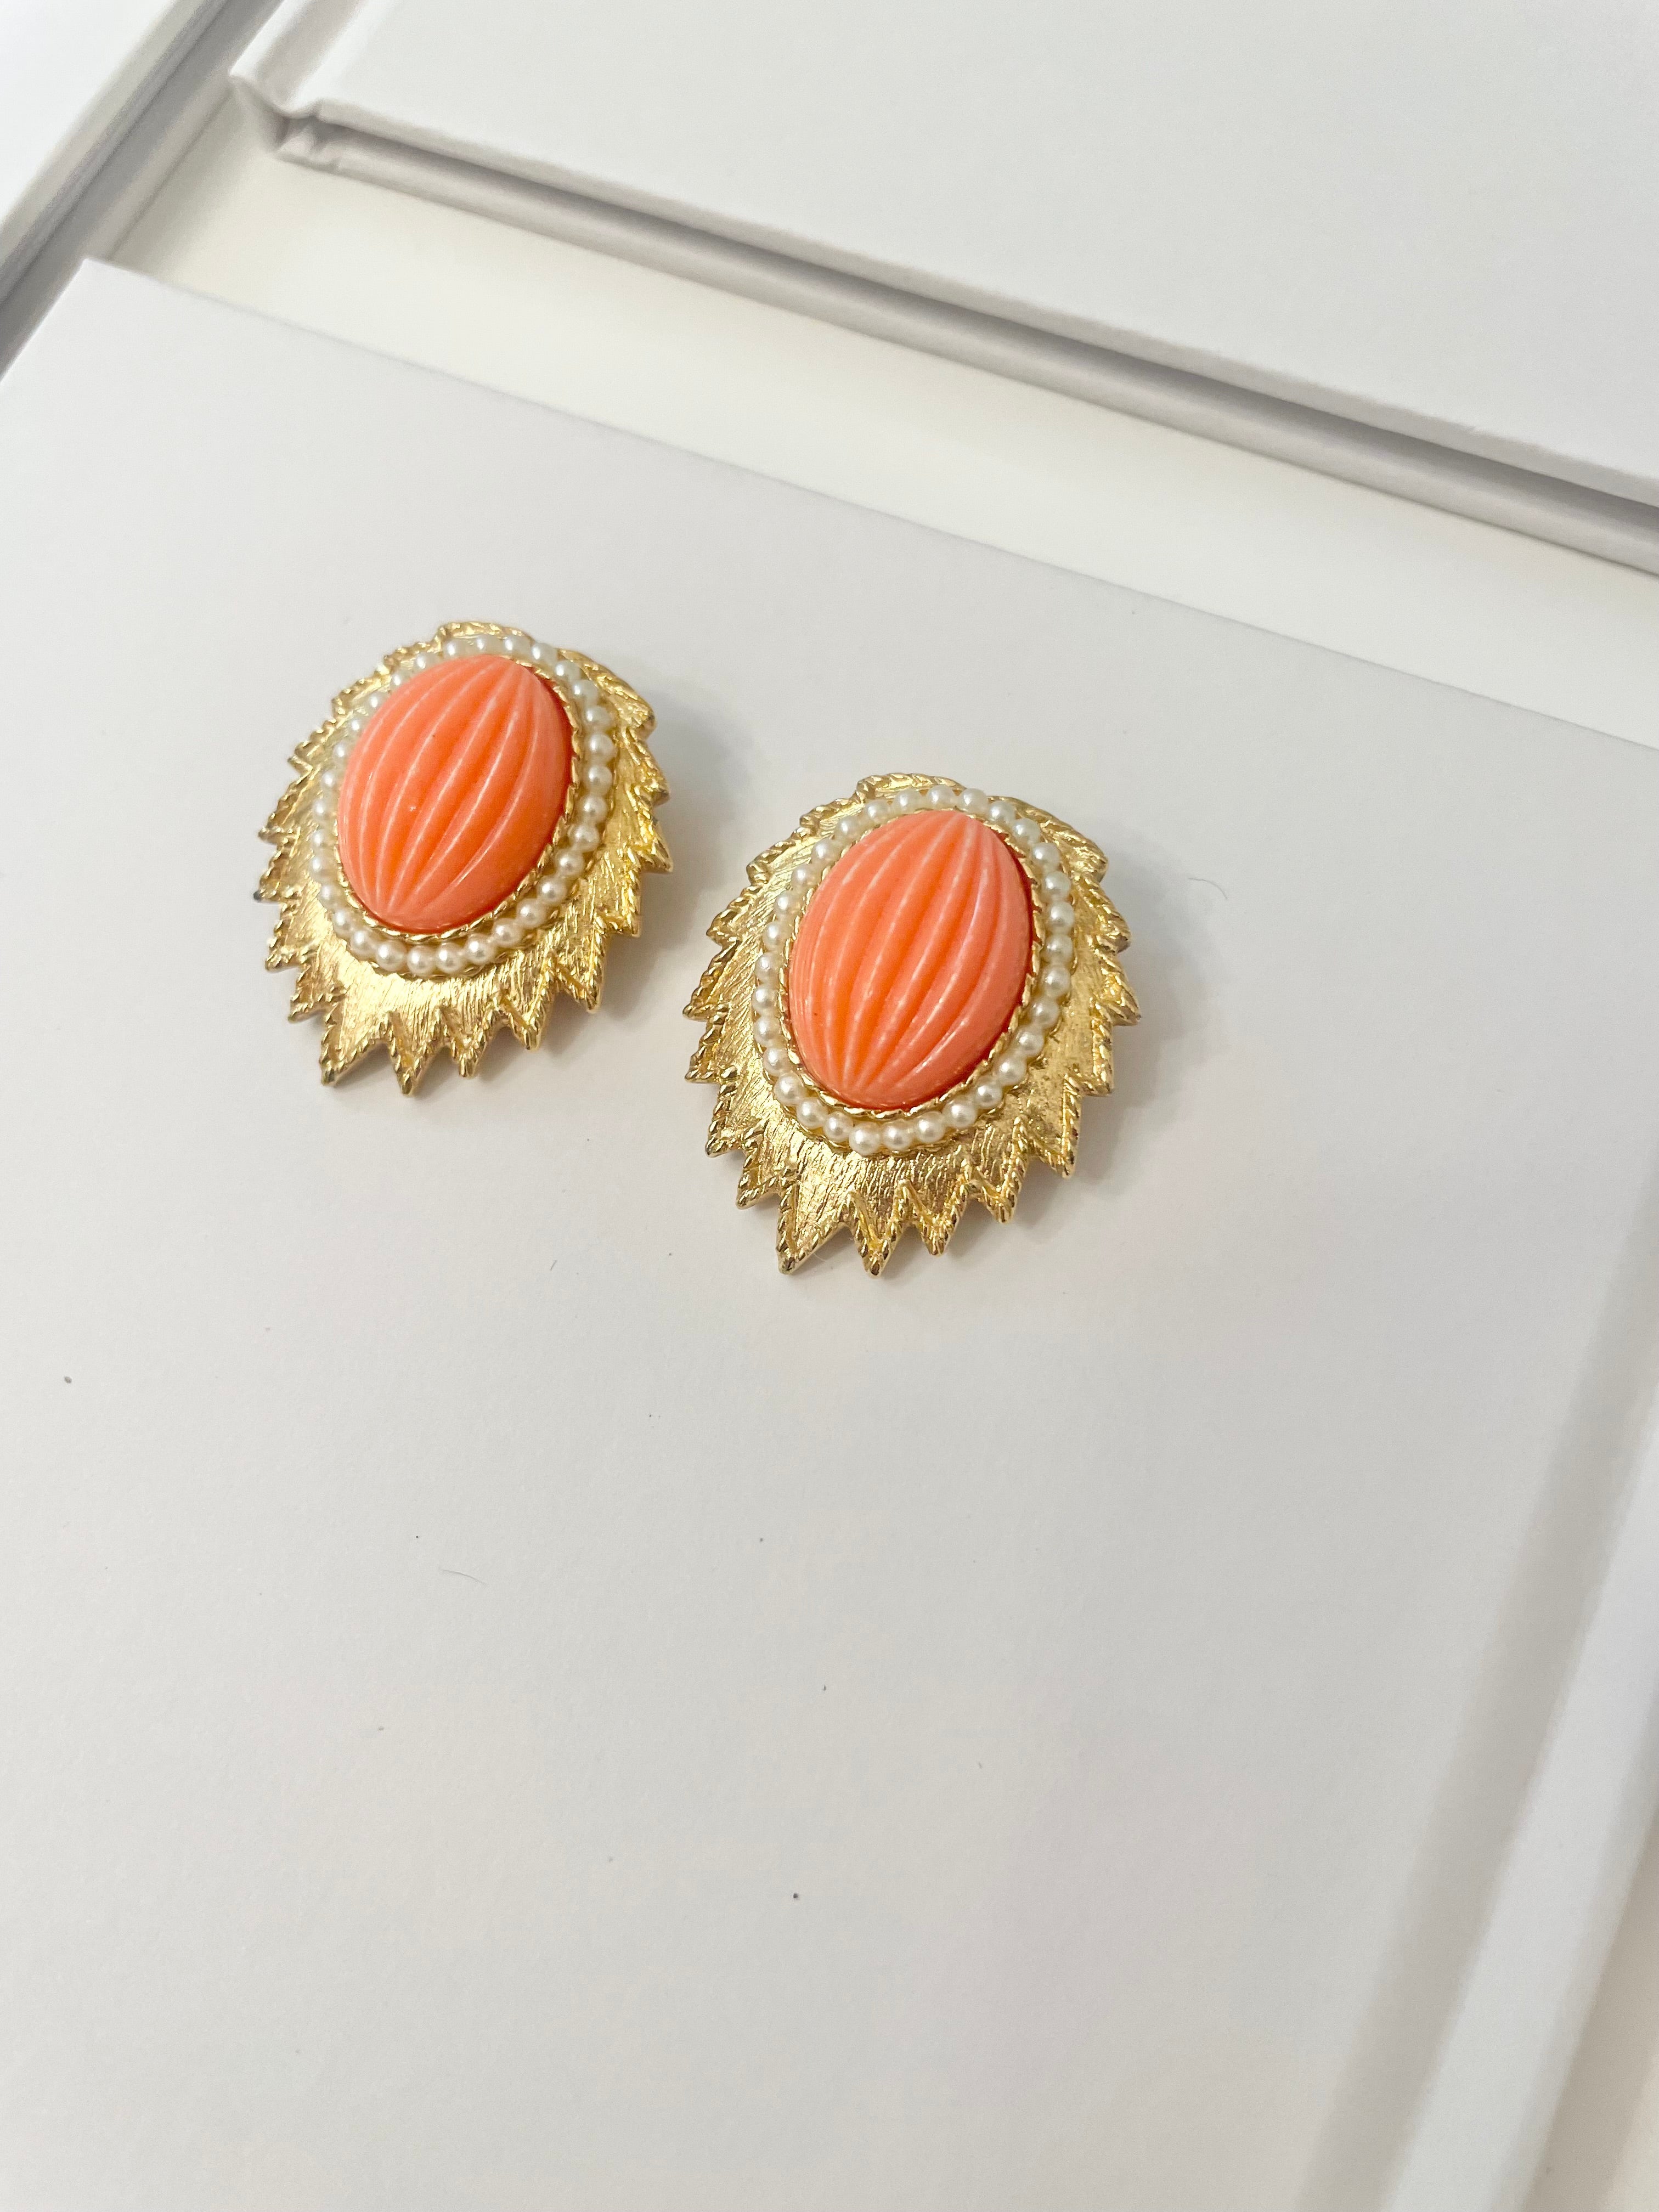 The Happy Hostess loves anything colorful.. She adores coral, and gold! These Emmons earrings are a true mid century delight!